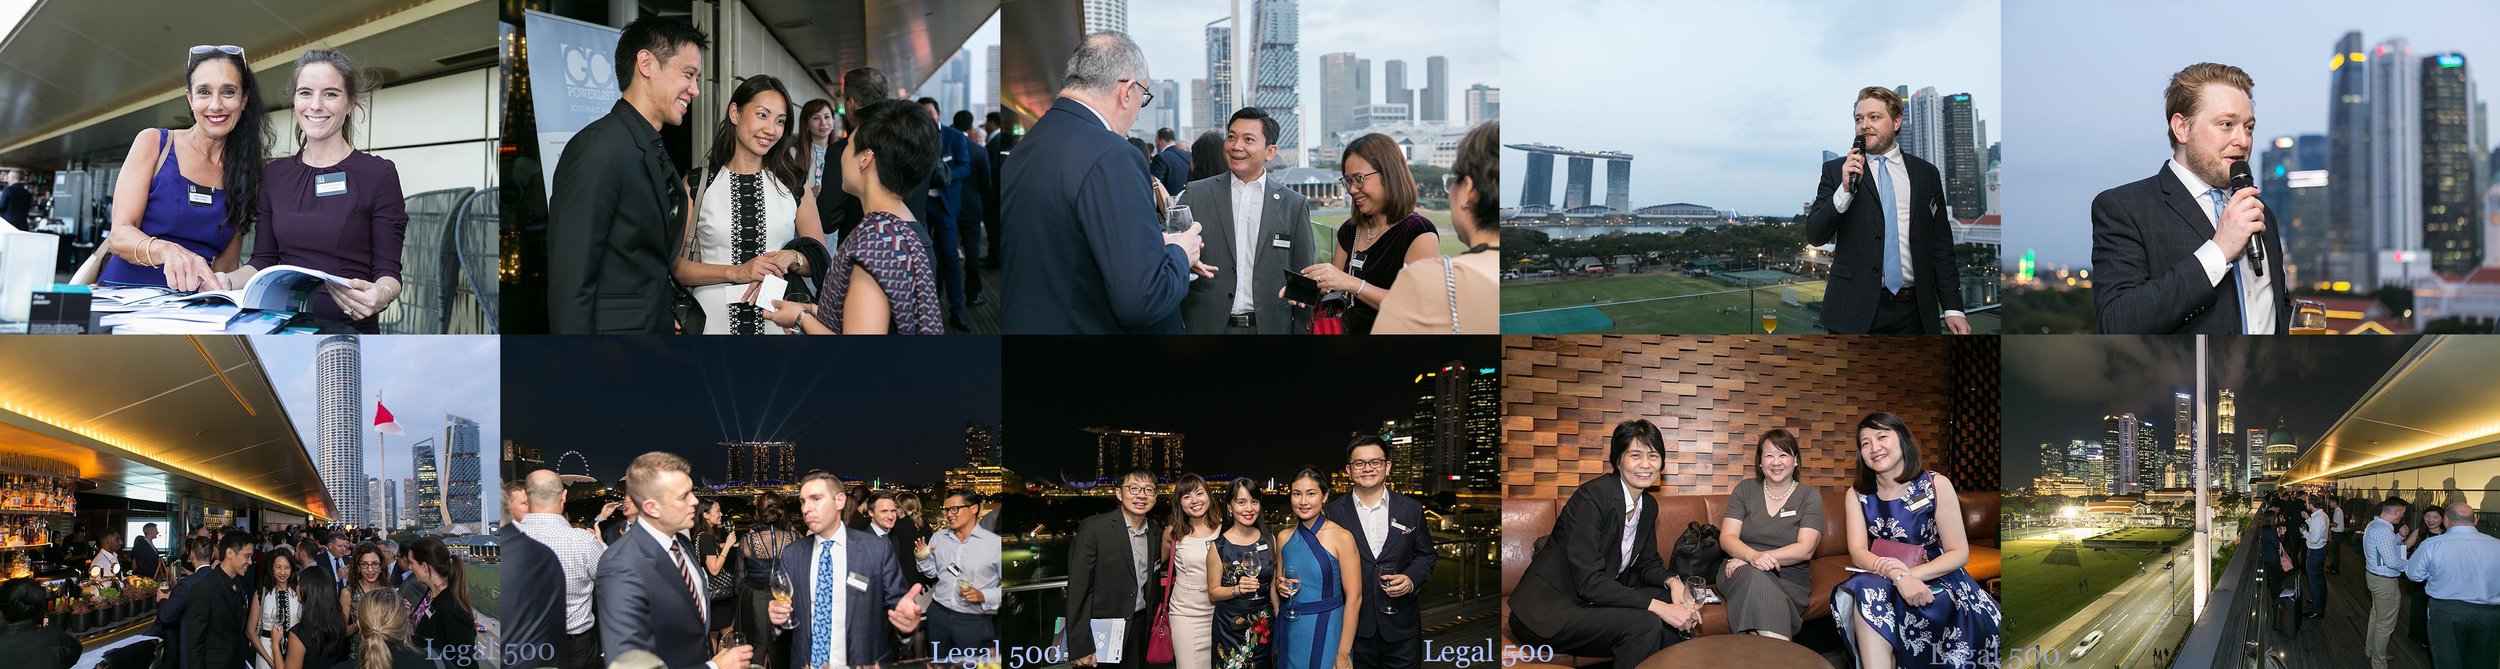 Networking event photography service in Singapore